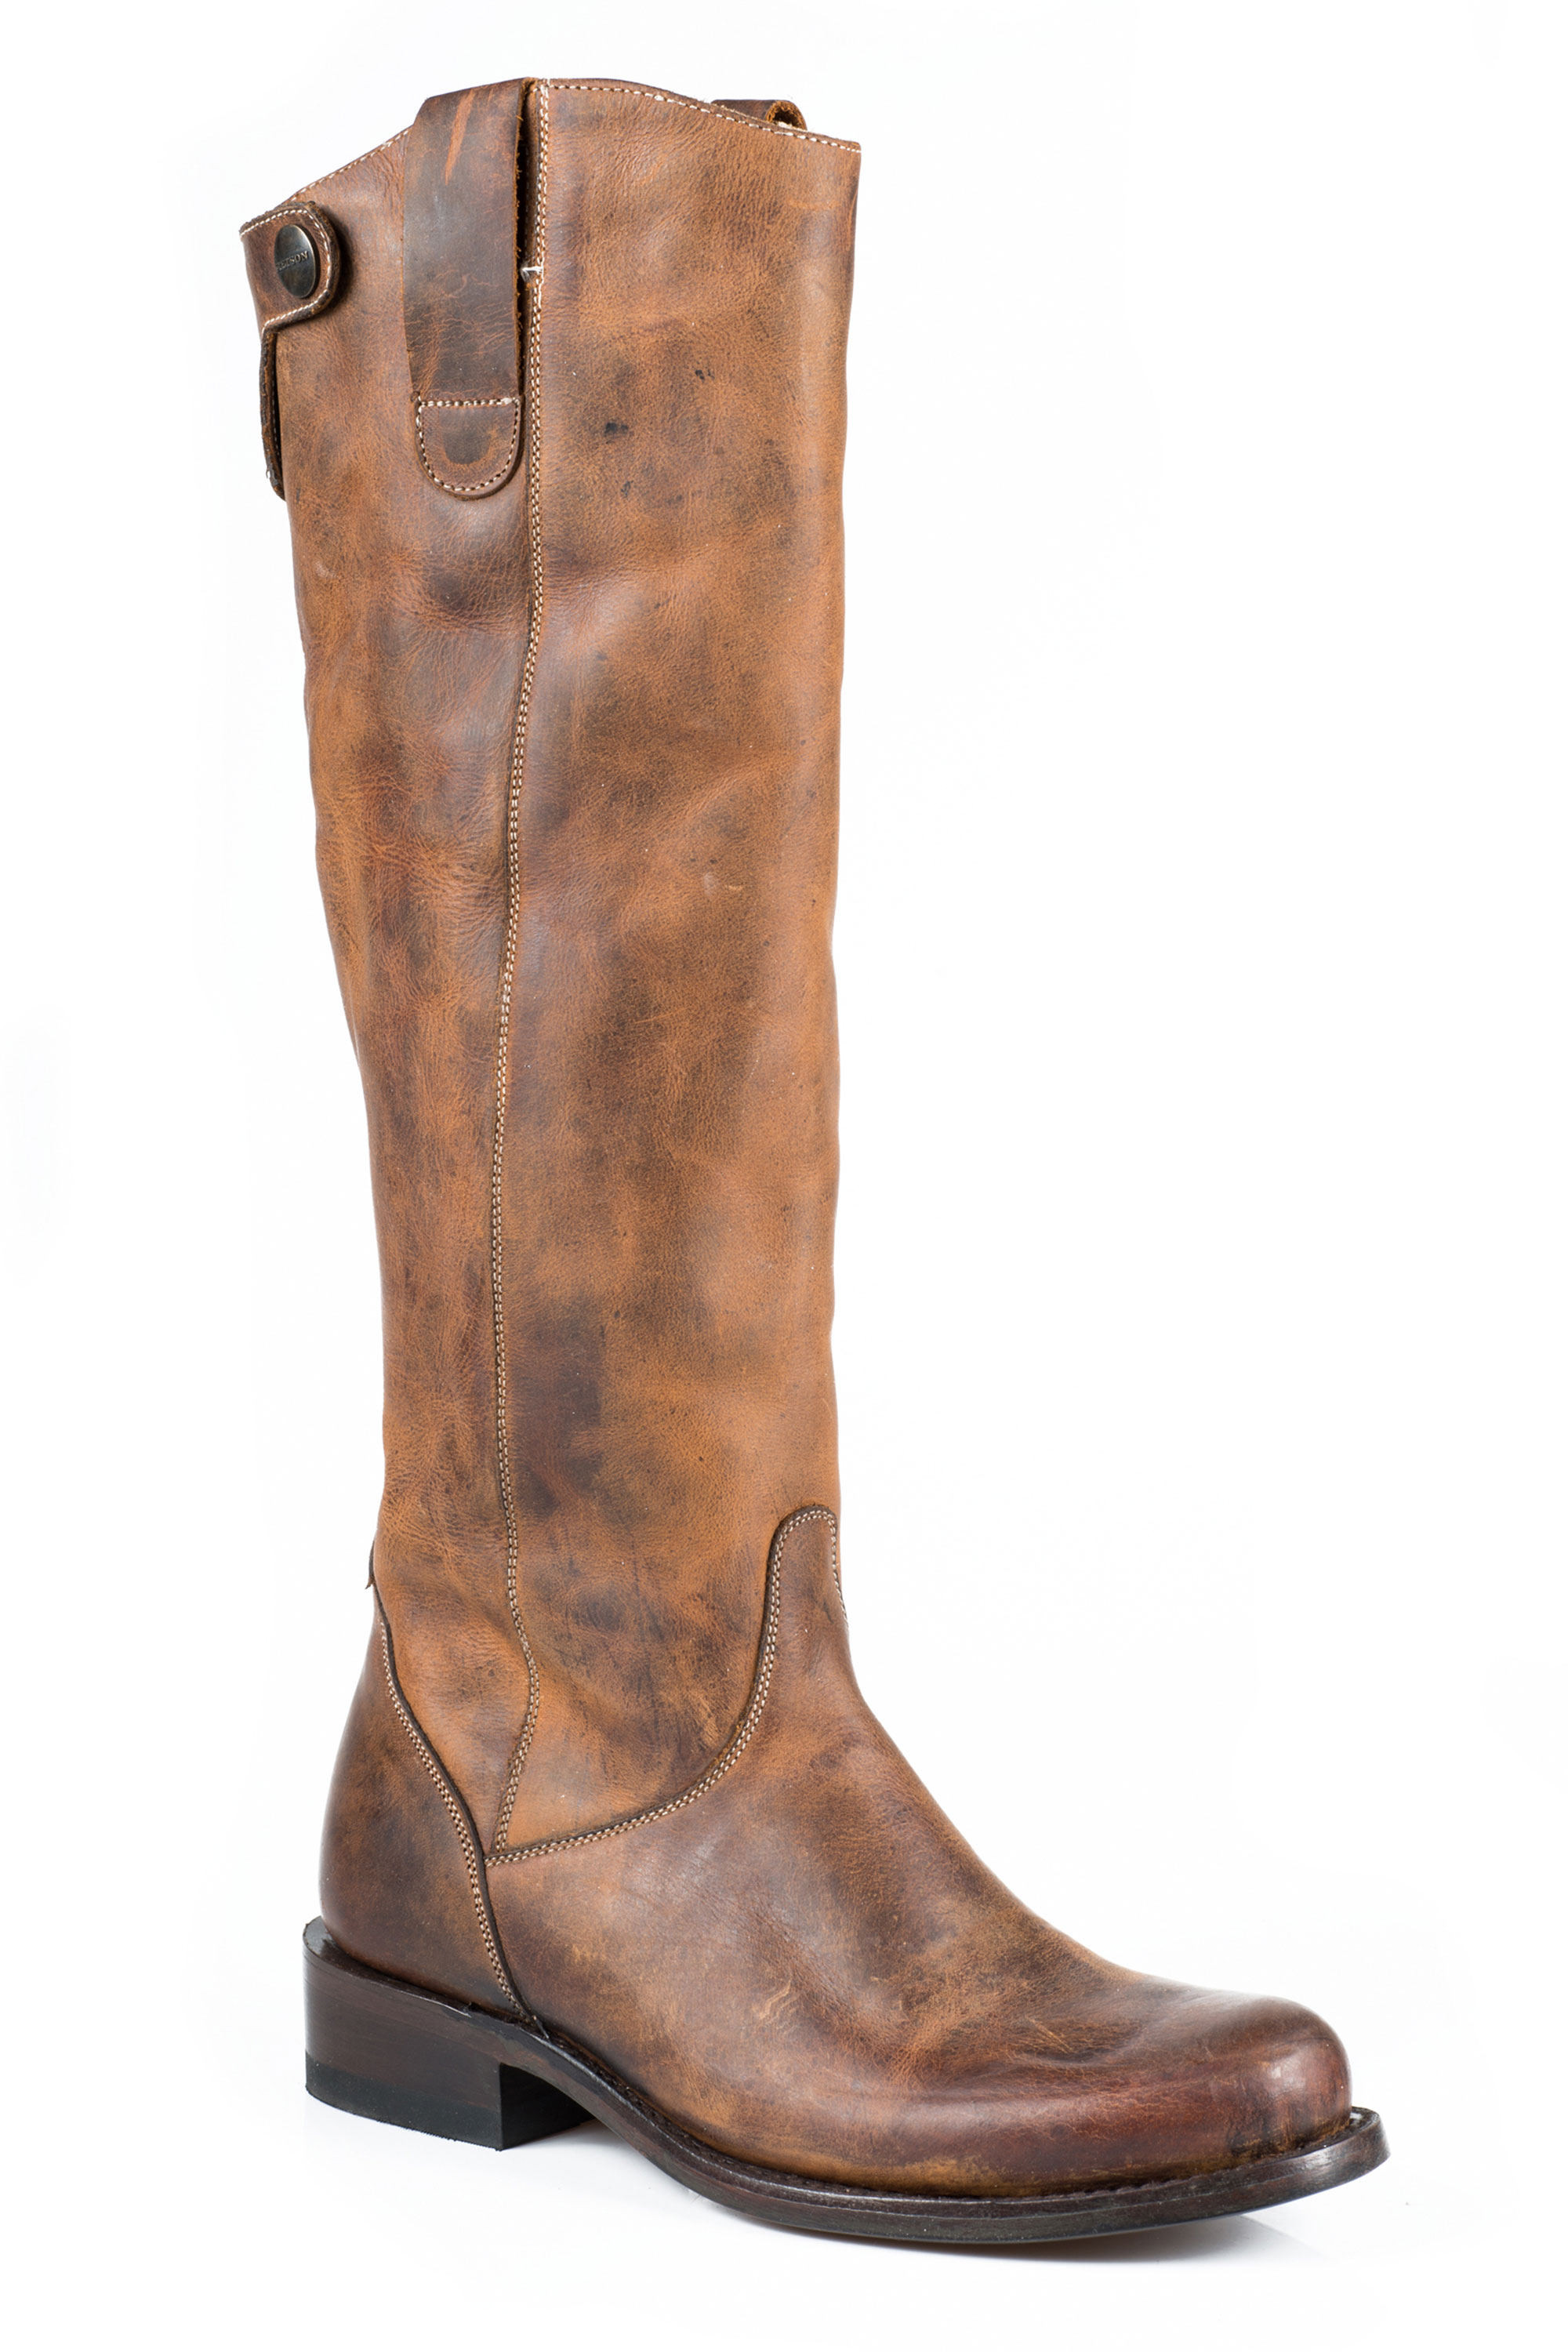 Pungo Ridge - Stetson Ladies Dover Tall Fashion Boots - Burnished Brown ...